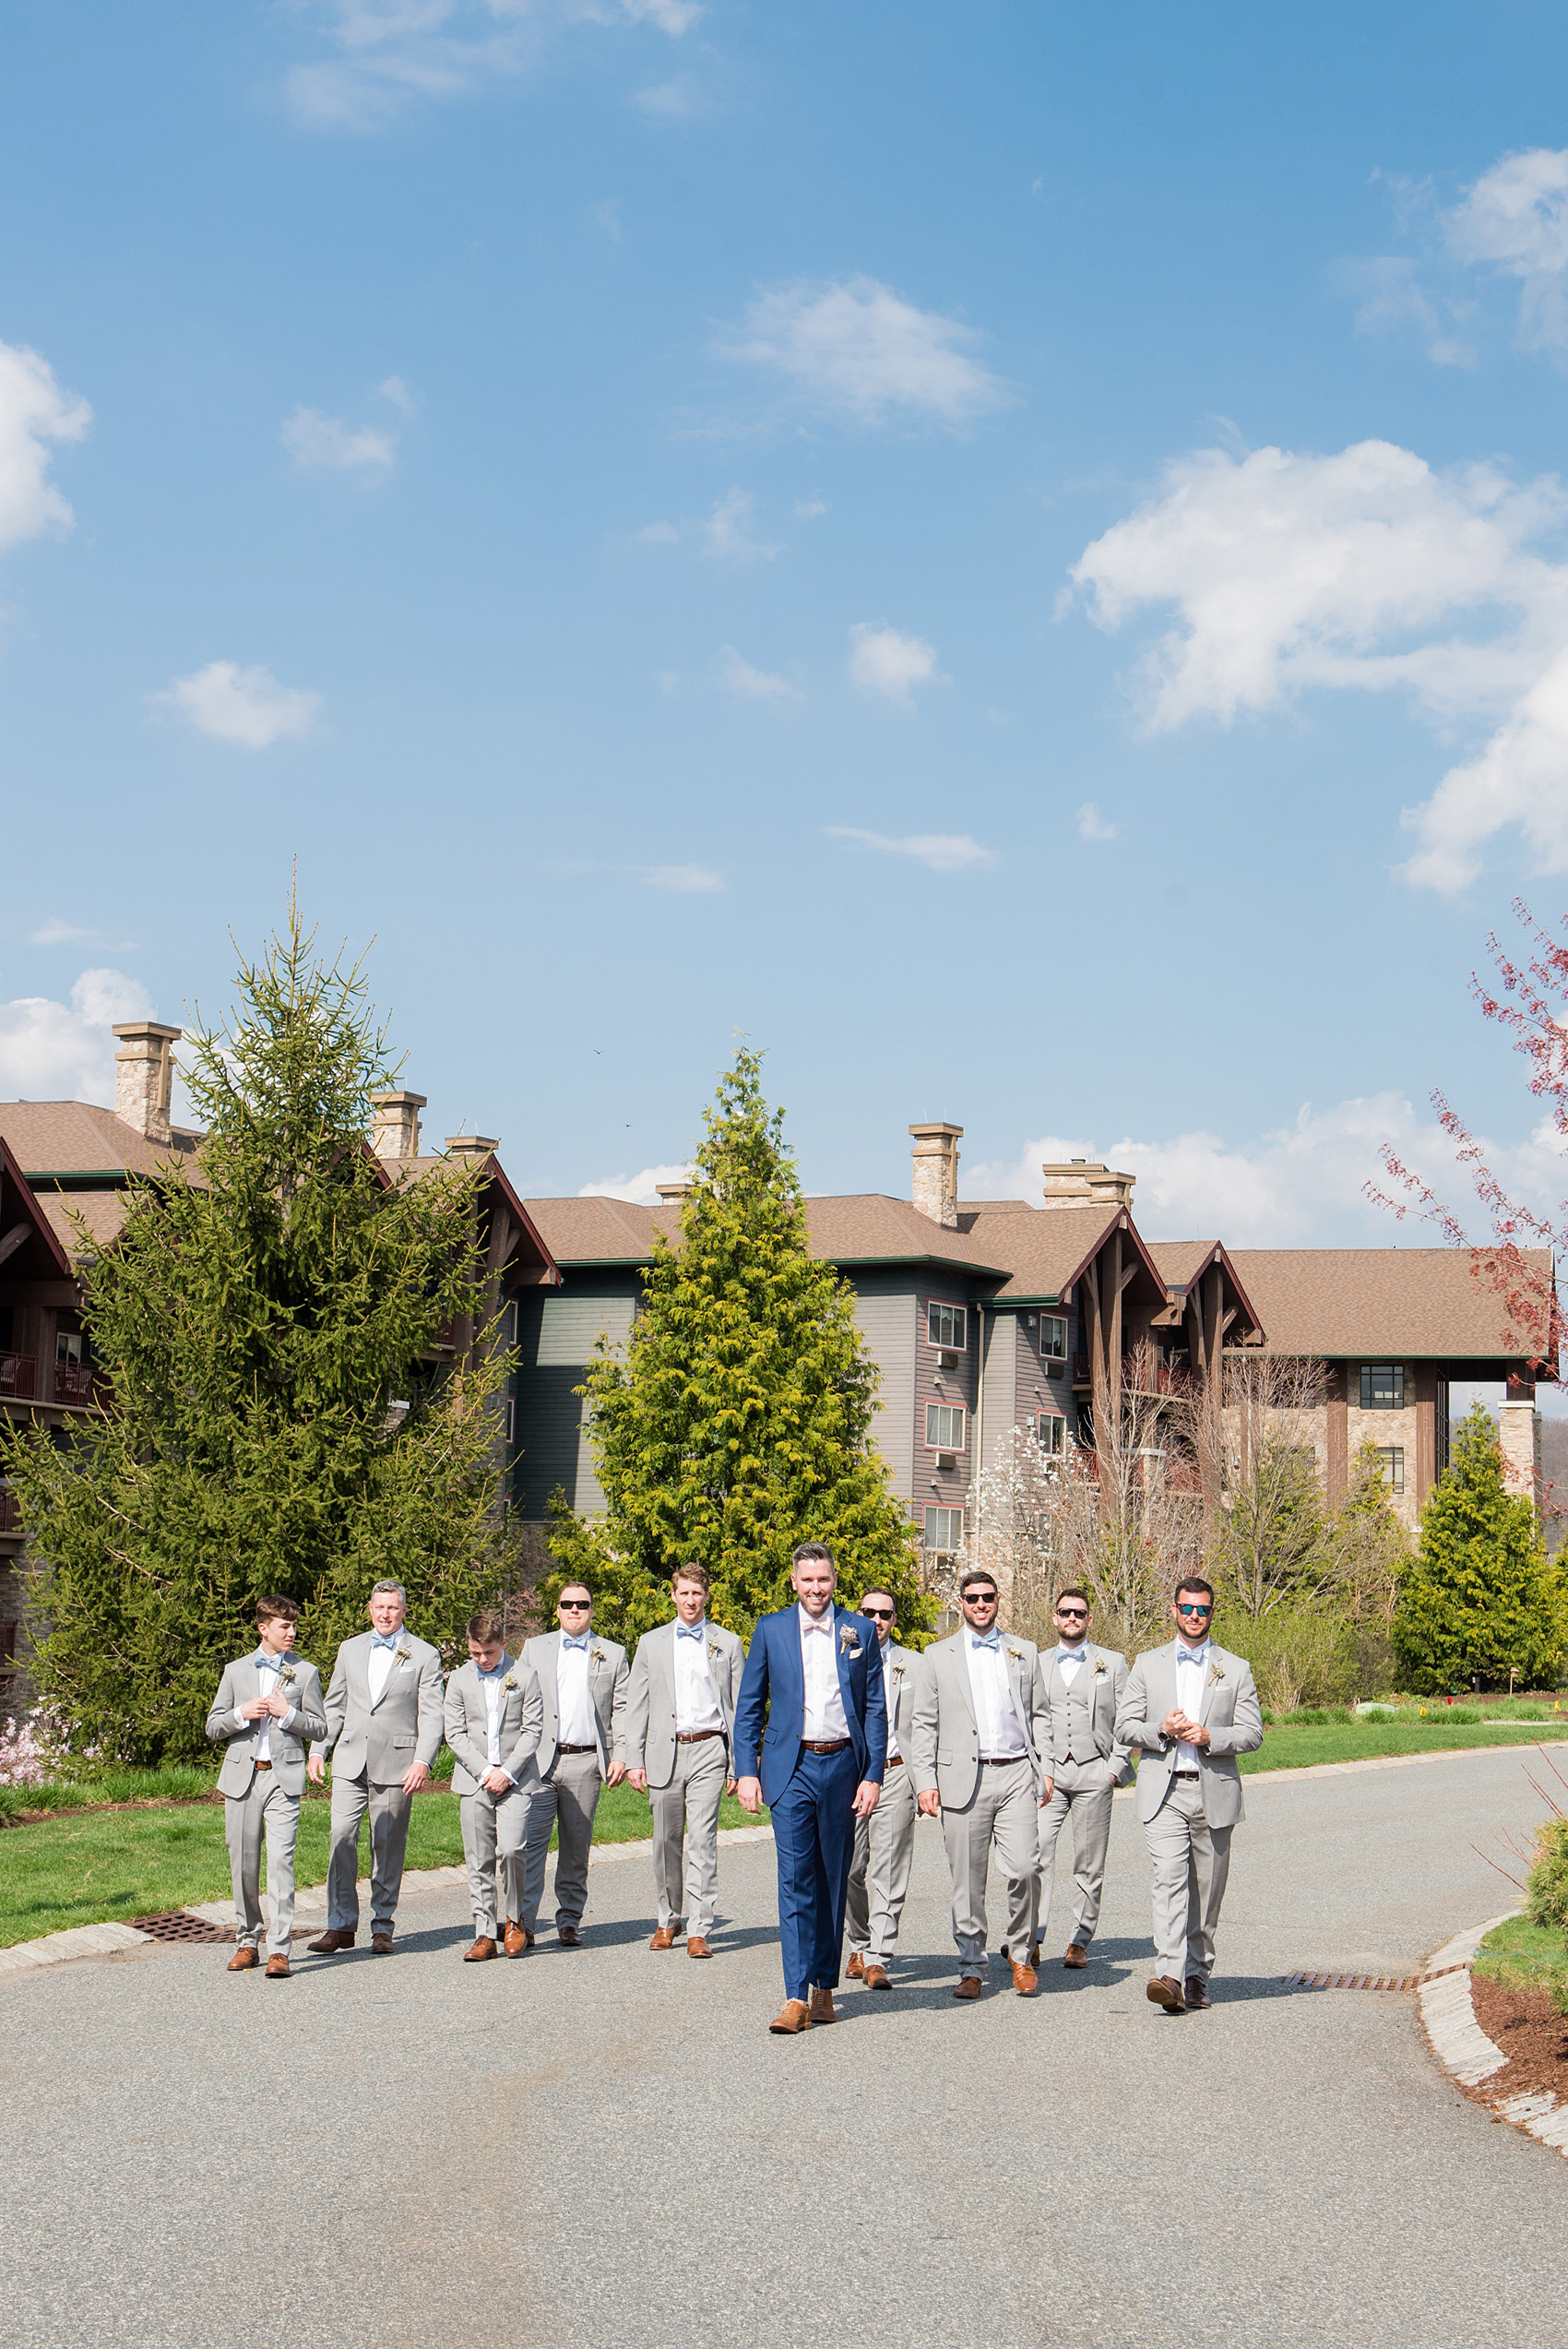 Crystal Springs Resort wedding photos in New Jersey, with photographer Mikkel Paige Photography. The couple’s spring wedding had an outdoor ceremony with photos at this rustic, woodsy venue showing their blue and pink palette decor from getting ready to their reception. This picture shows the groomsmen in their grey suits and blue bow ties with the groom in a custom navy suit and pink bow tie. Click through to see their complete wedding recap! #NewJerseywedding #MikkelPaige #NJweddingphotographer #NJphotographer #brideandgroom #springwedding #pinkandblue #weddingparty #groomsmen #bowties